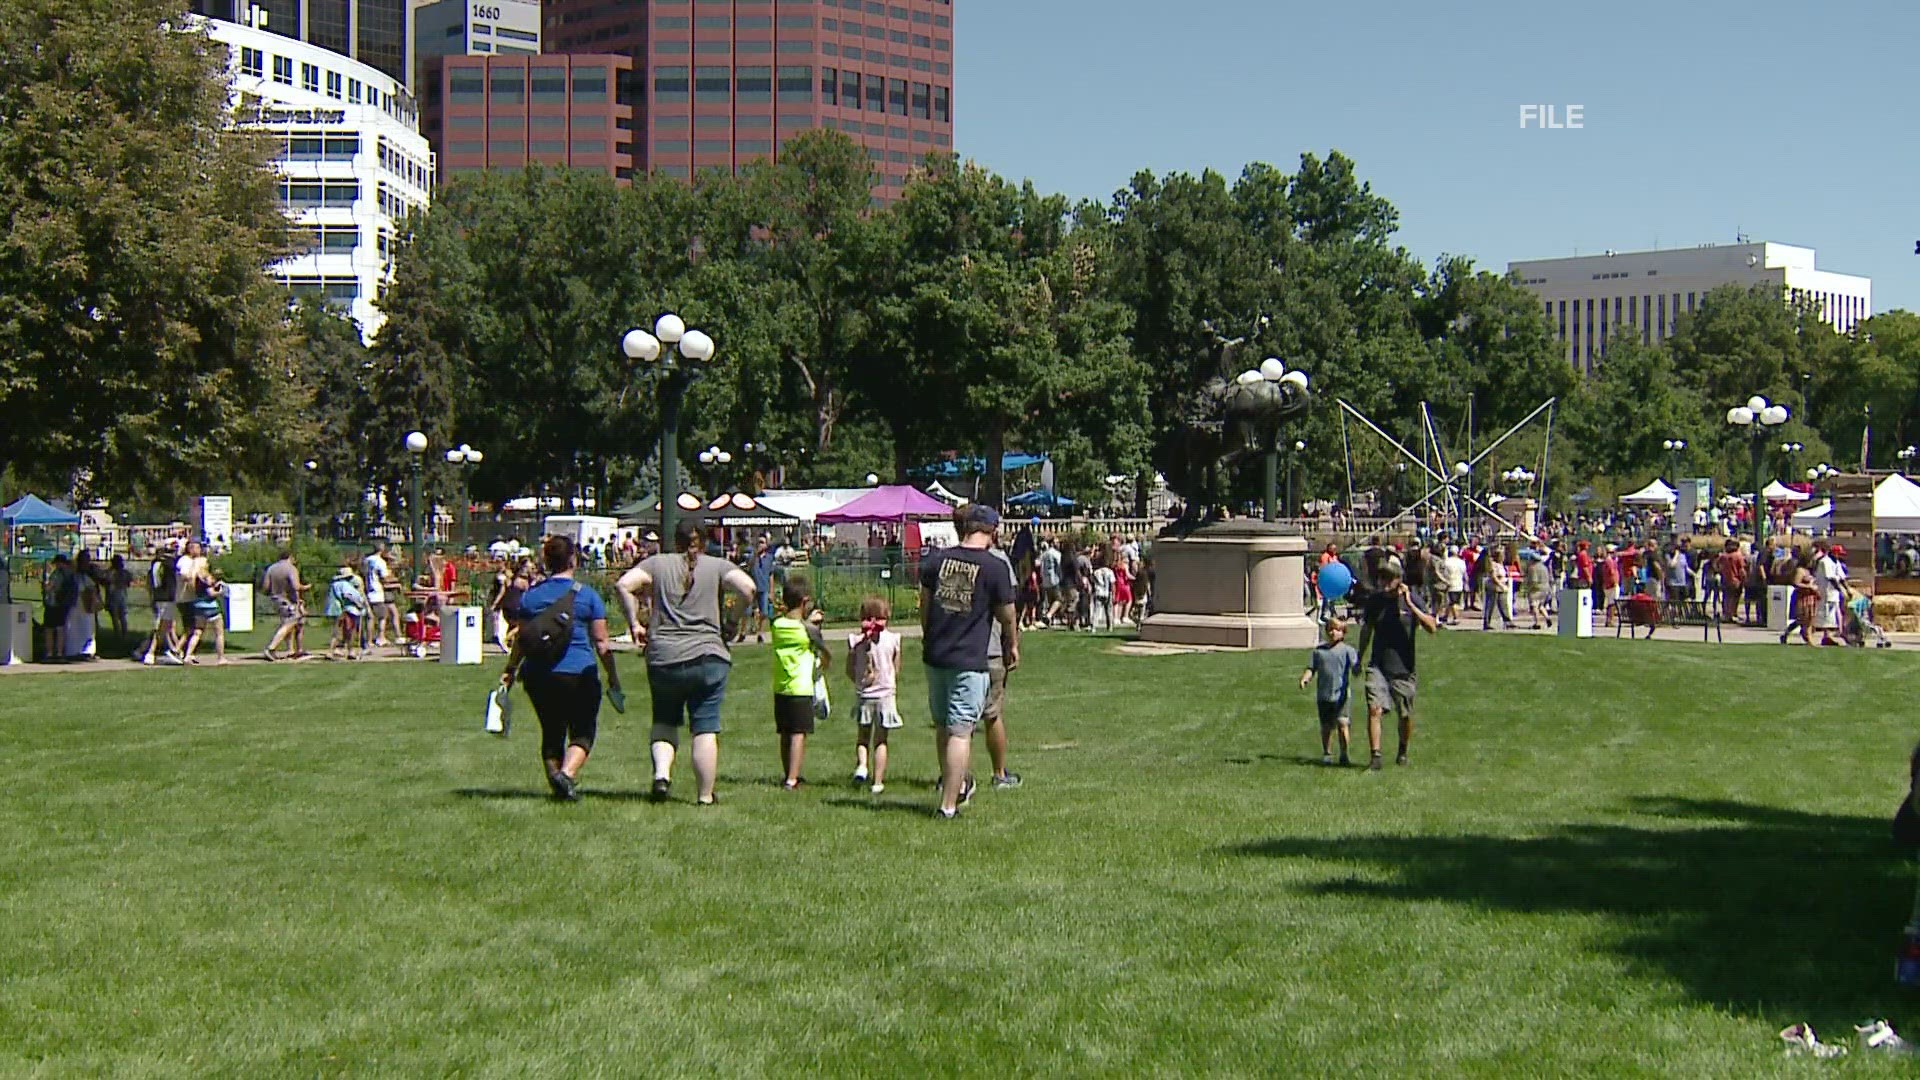 Colorado's signature Labor Day weekend event will not be held this year. Downtown Denver Partnership will not hold its annual Taste of Colorado this weekend.